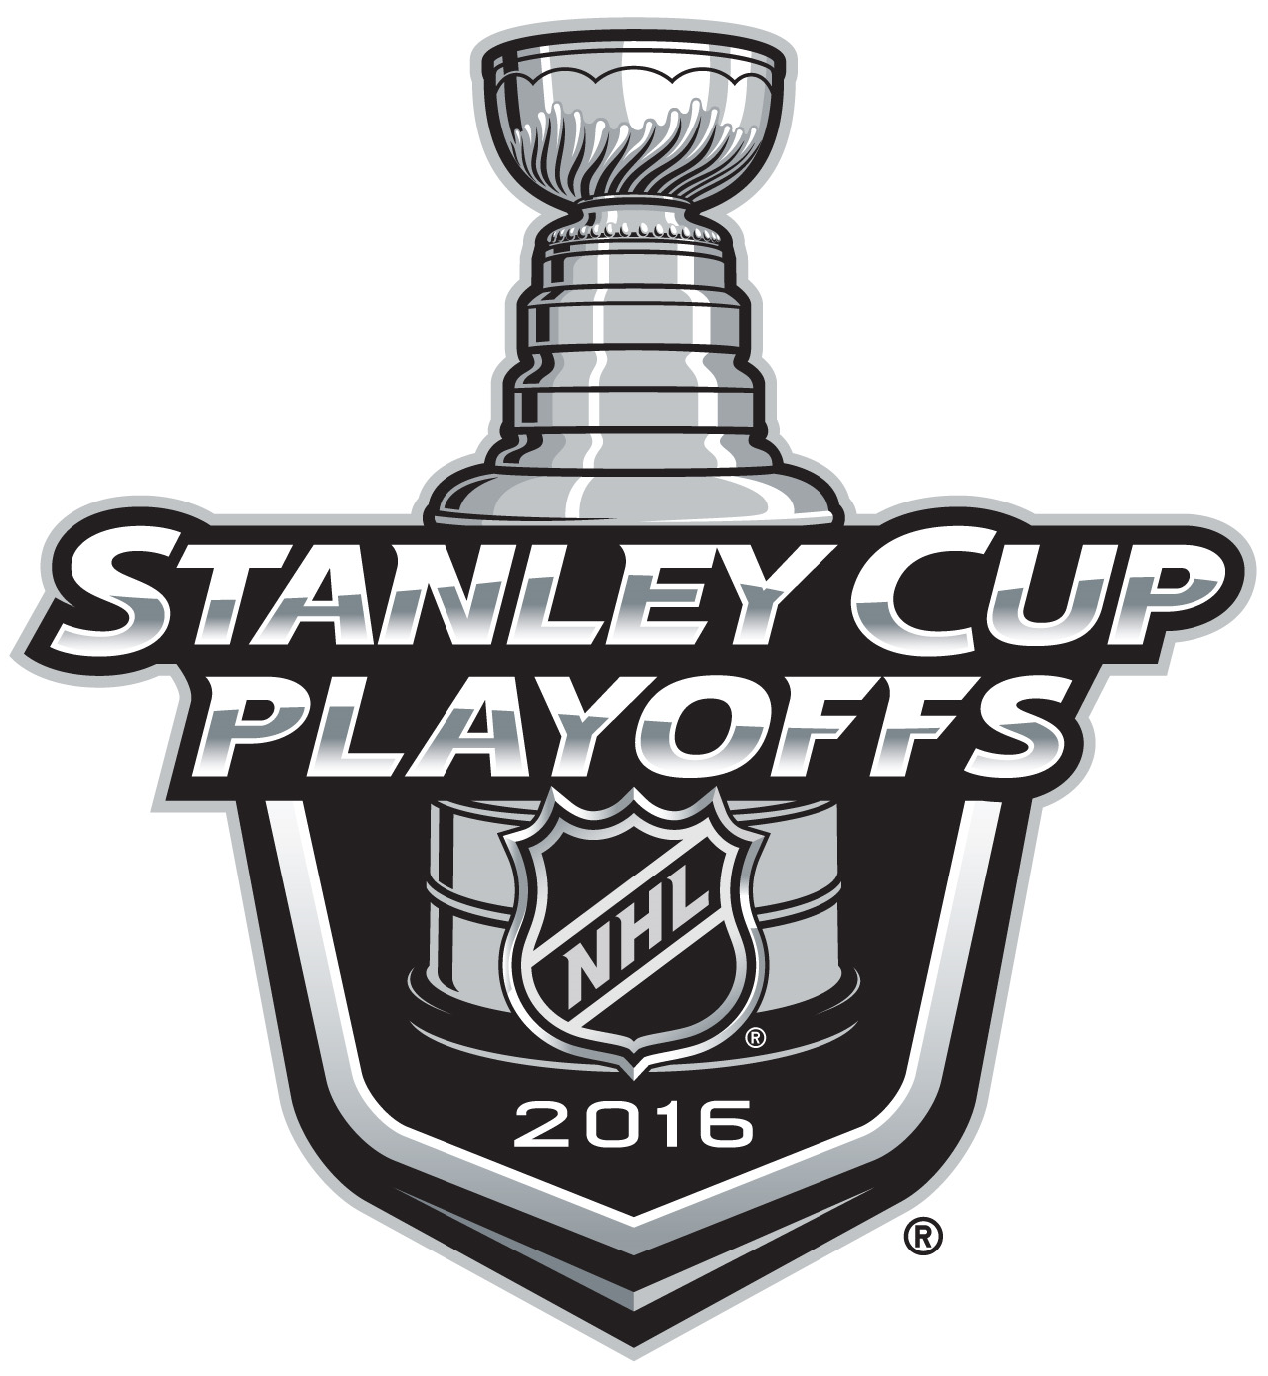 Stanley Cup Playoffs 2016 Primary Logo DIY iron on transfer (heat transfer)